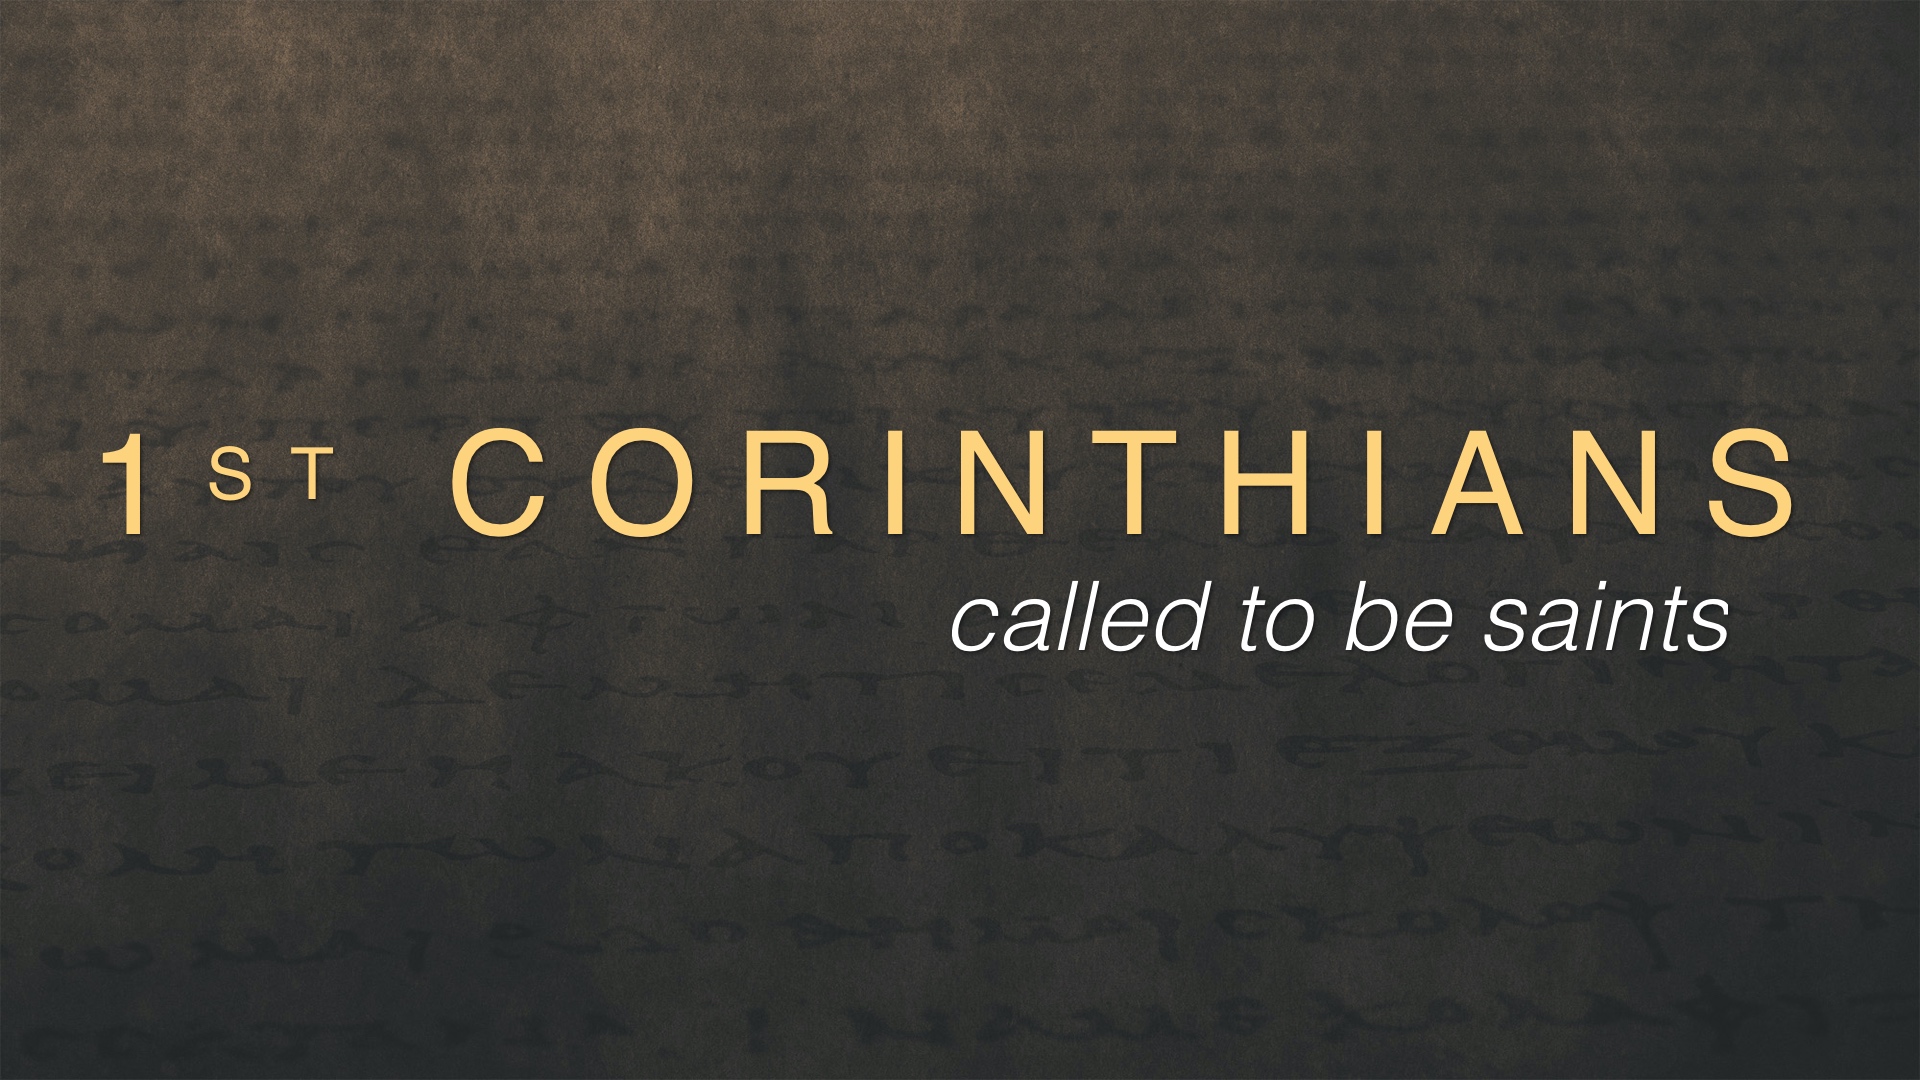 A Theology of Radical Contentment part 2 (1 Corinthians 7:17-24)